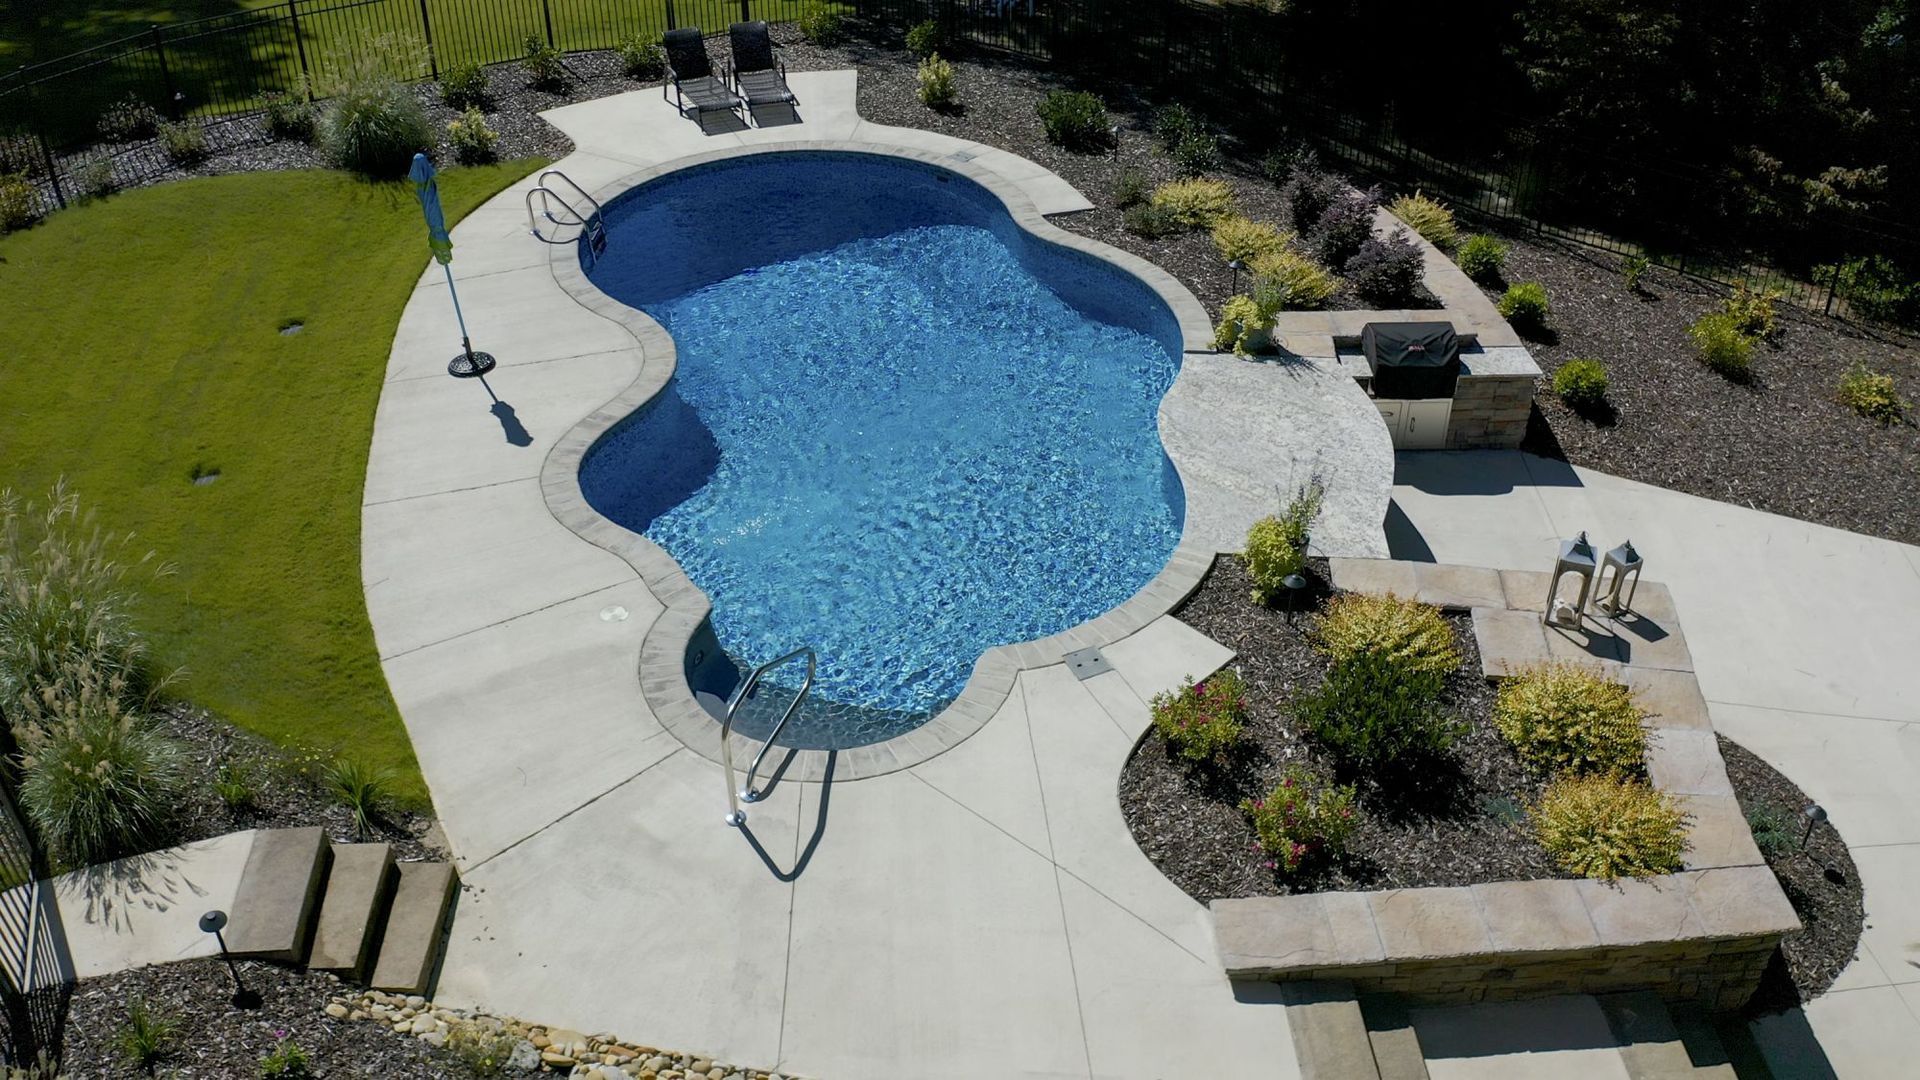 An aerial view of a large swimming pool in a backyard.